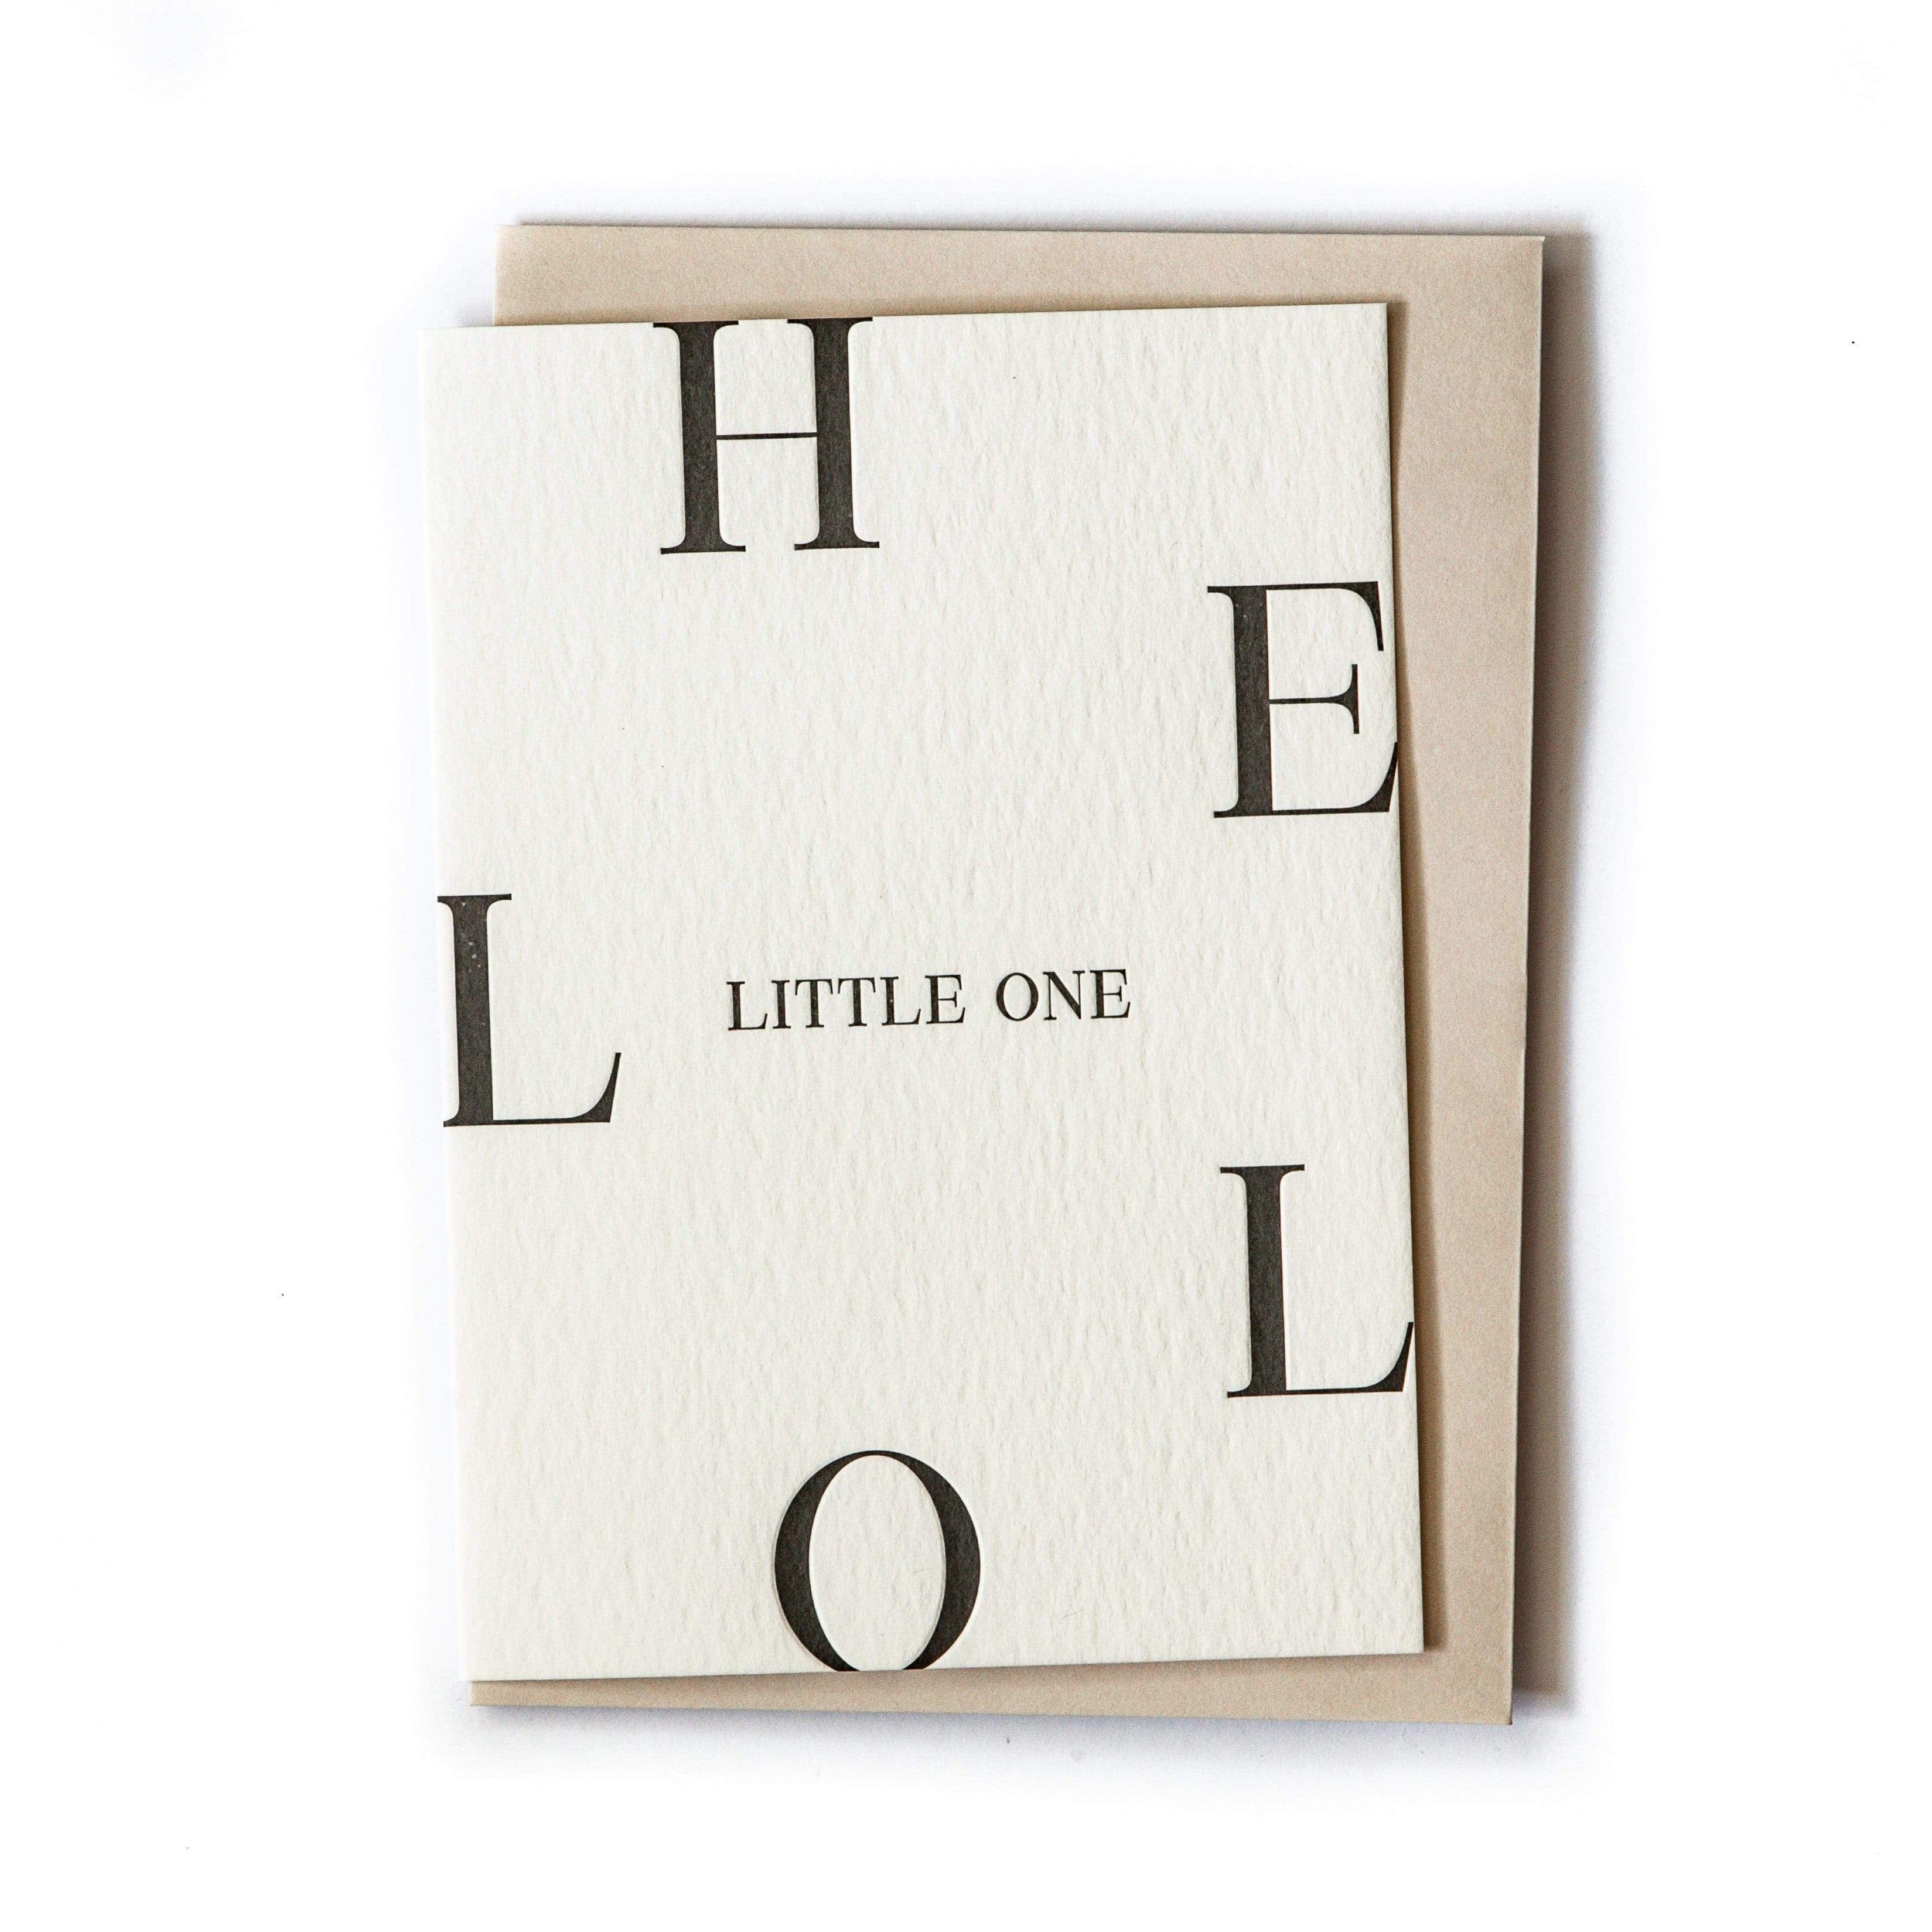 Hello Little One - Gift Box For Baby by Claya